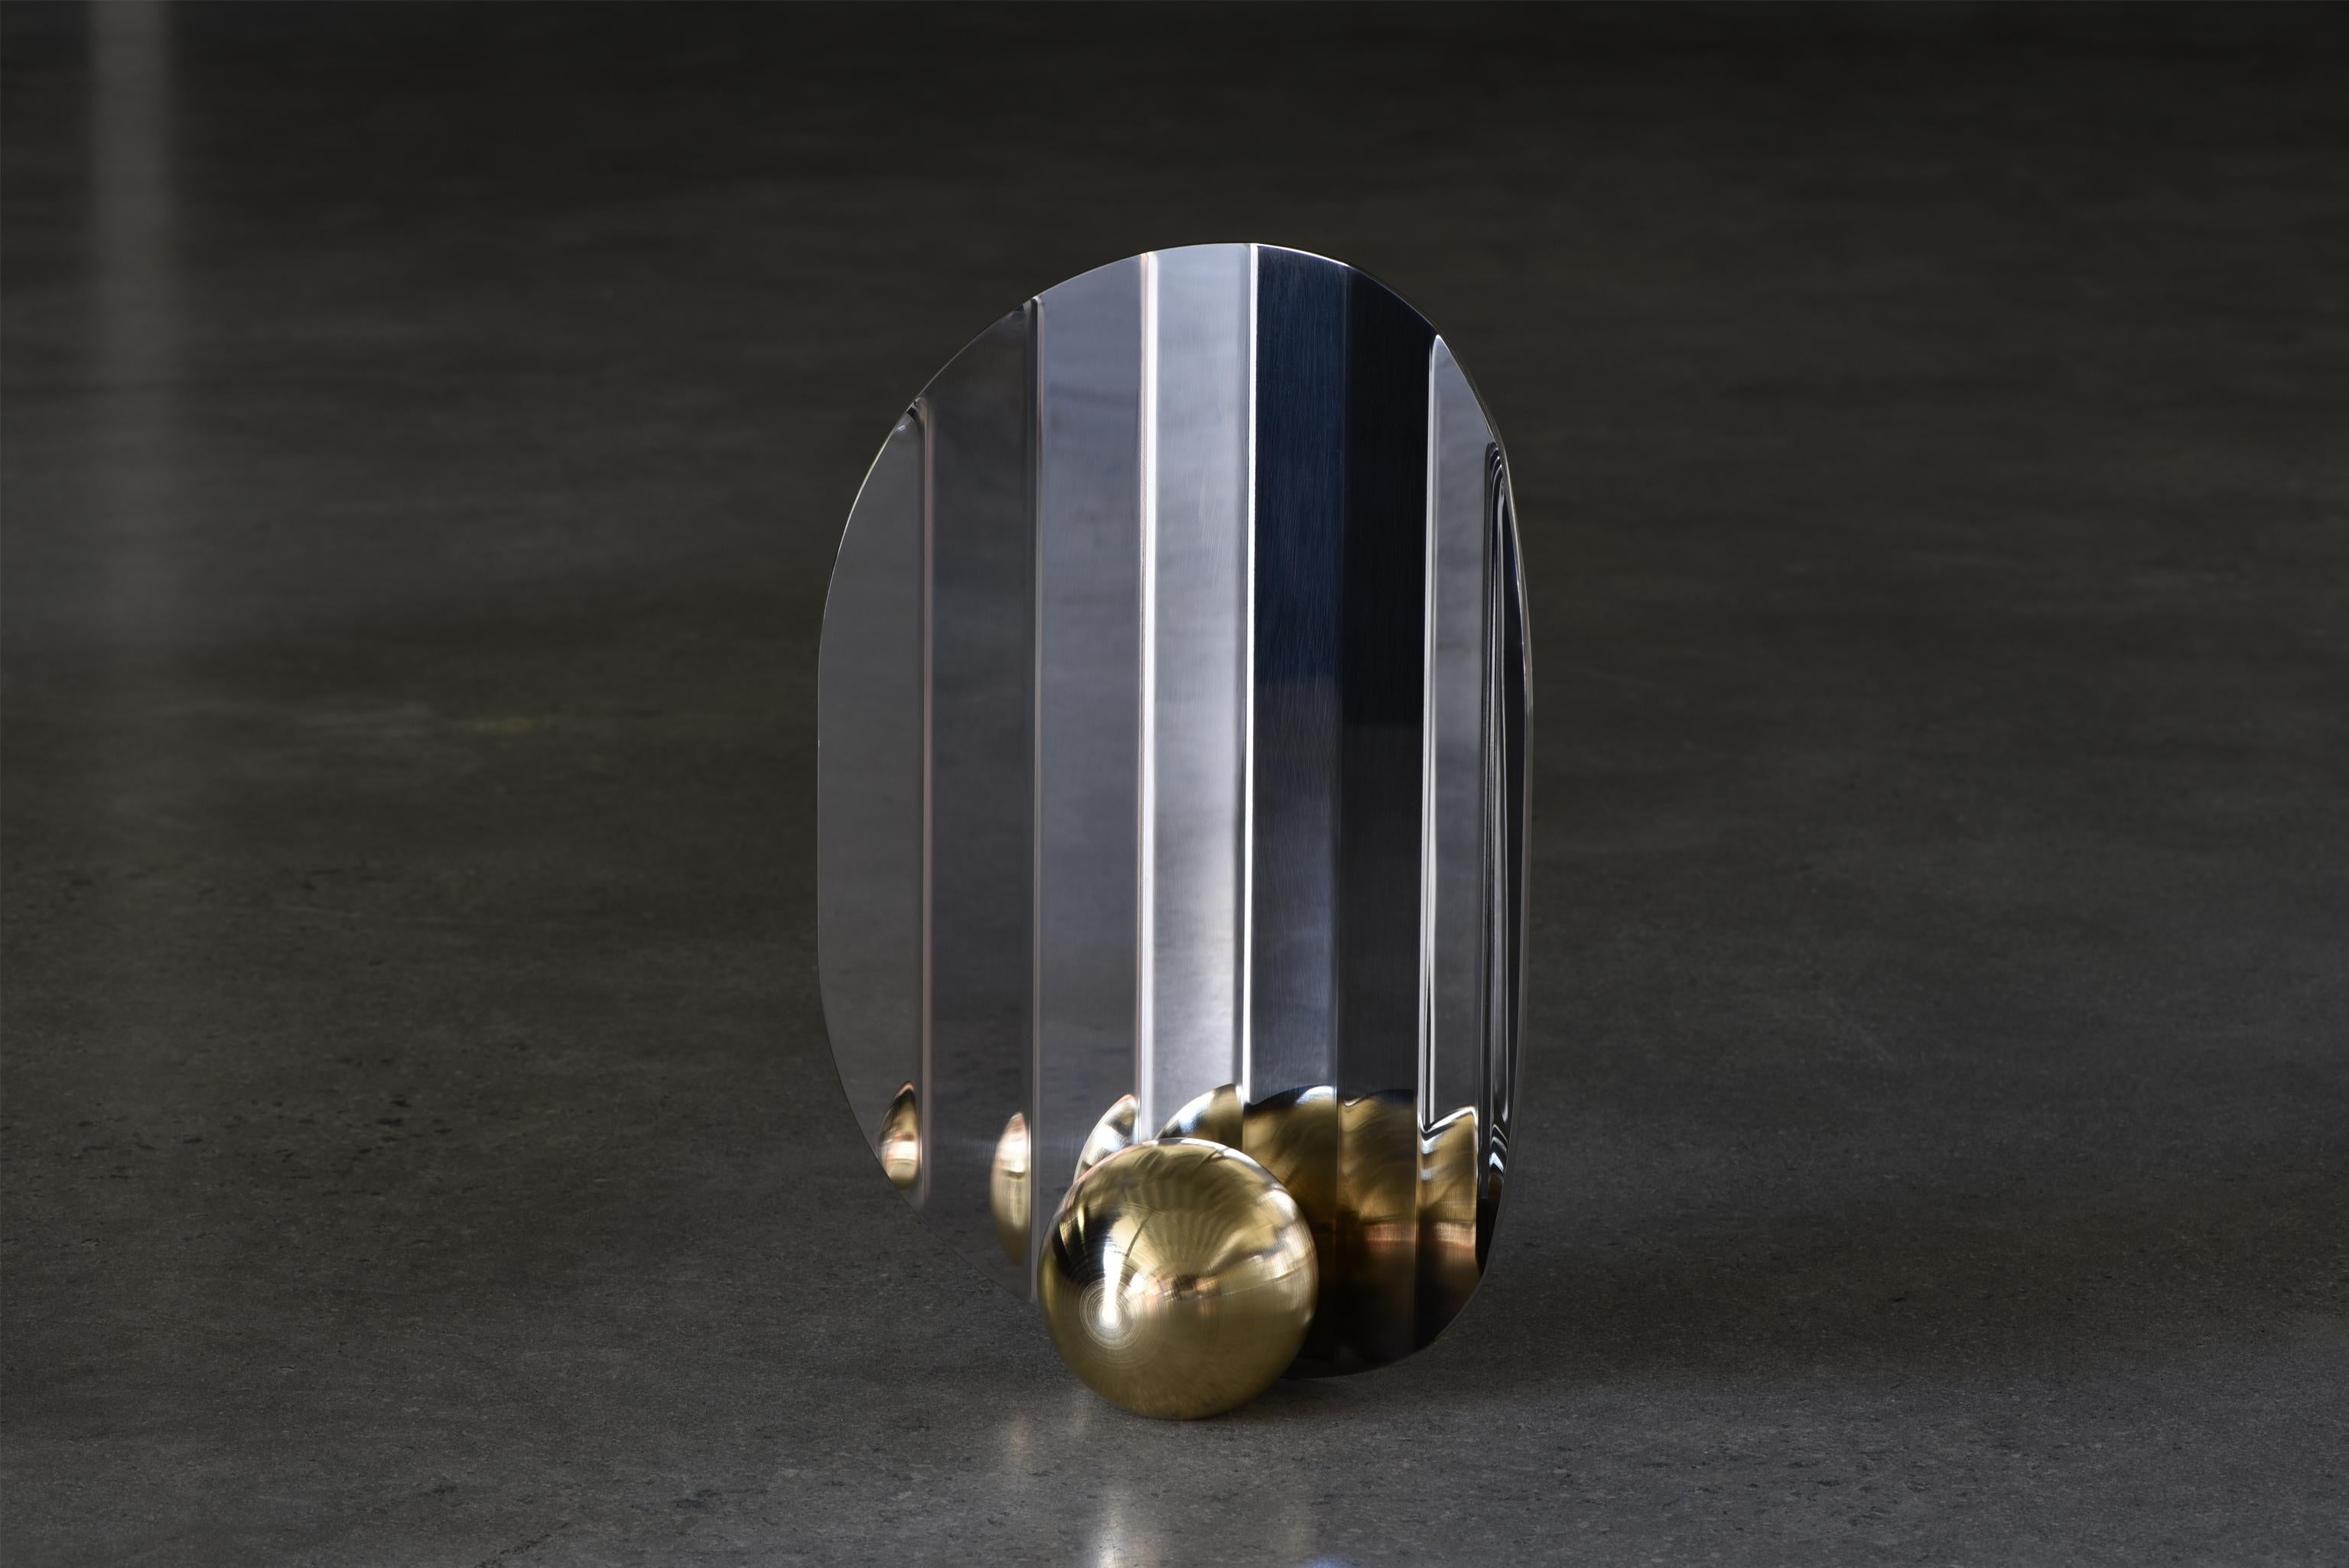 Render by Callum Campbell
Objects for self-collection
Signed and numbered
Dimensions: W 24 x D 8.8 H 36 cm
Materials: Brass, stainless steel
Finish: Polished
Physical appearance can be a huge driver of emotional resilience or defeat. Render